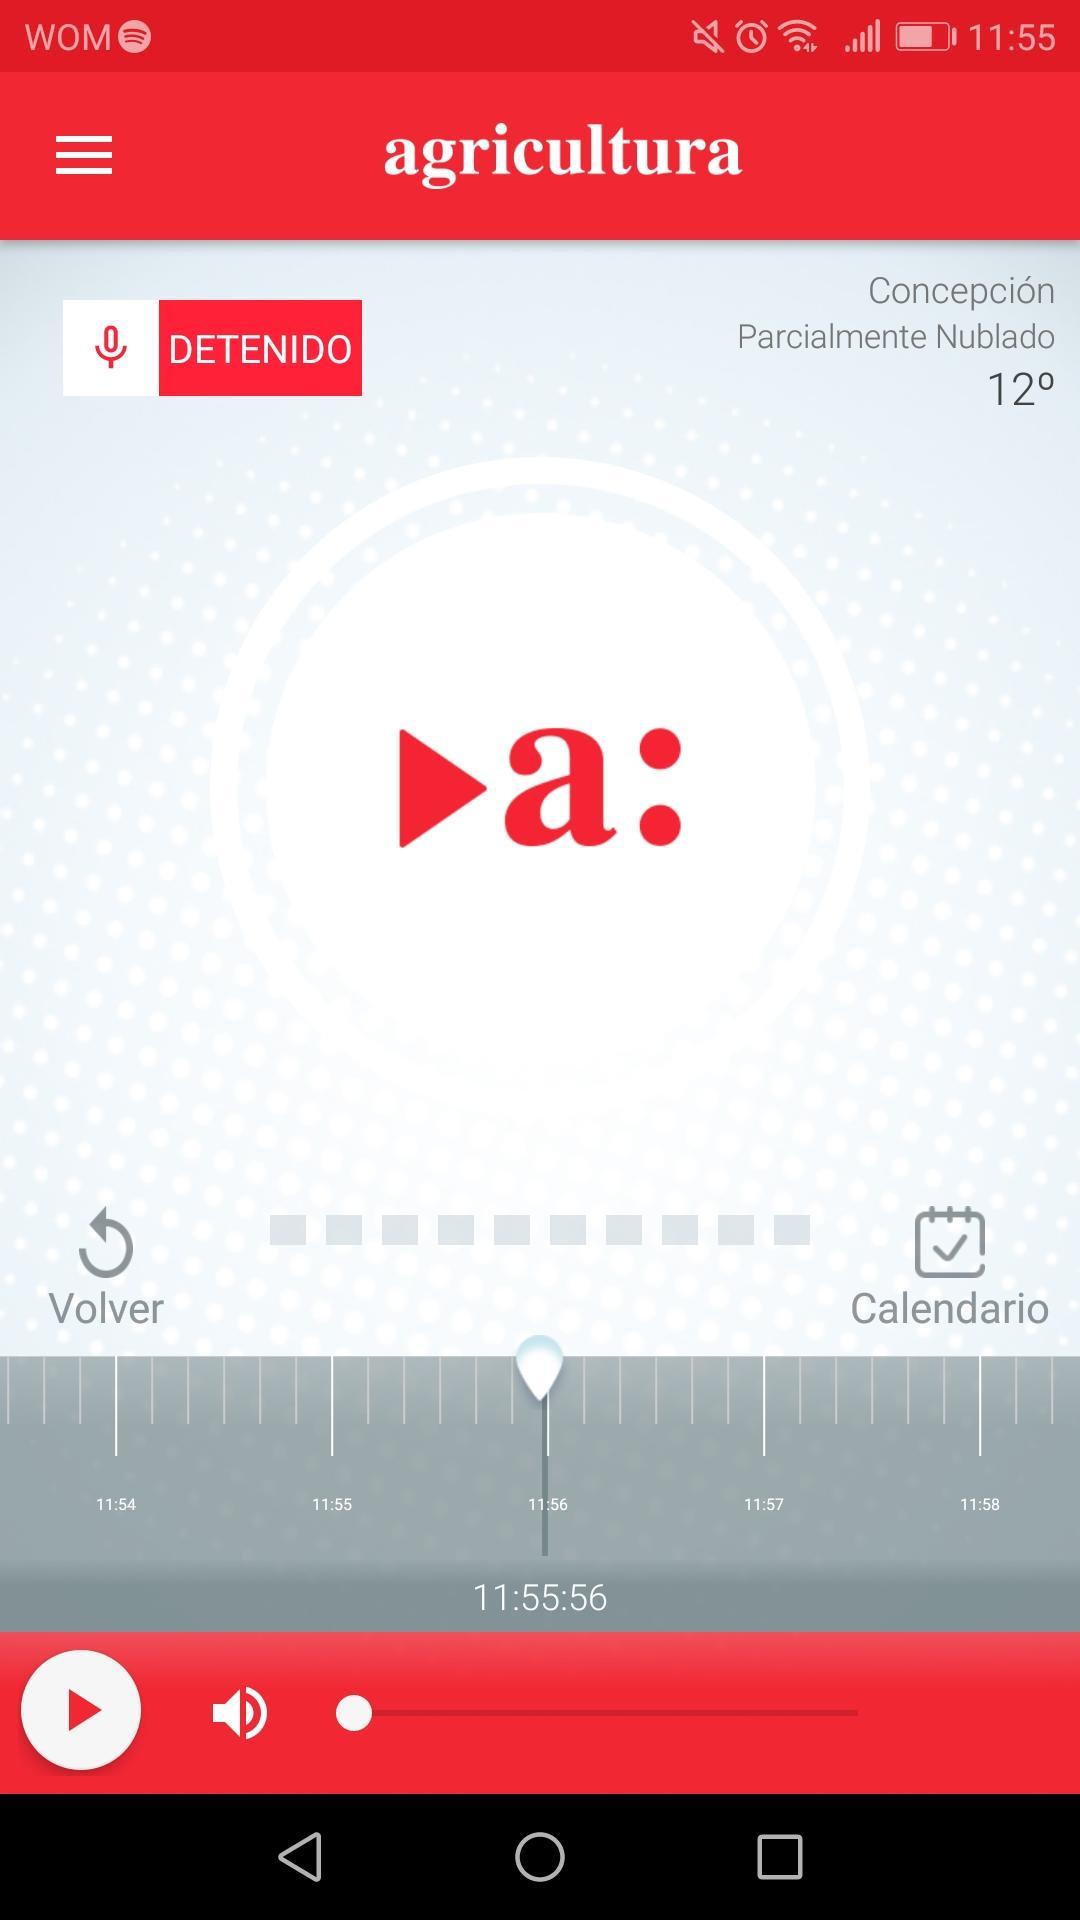 Radio Agricultura for Android - APK Download